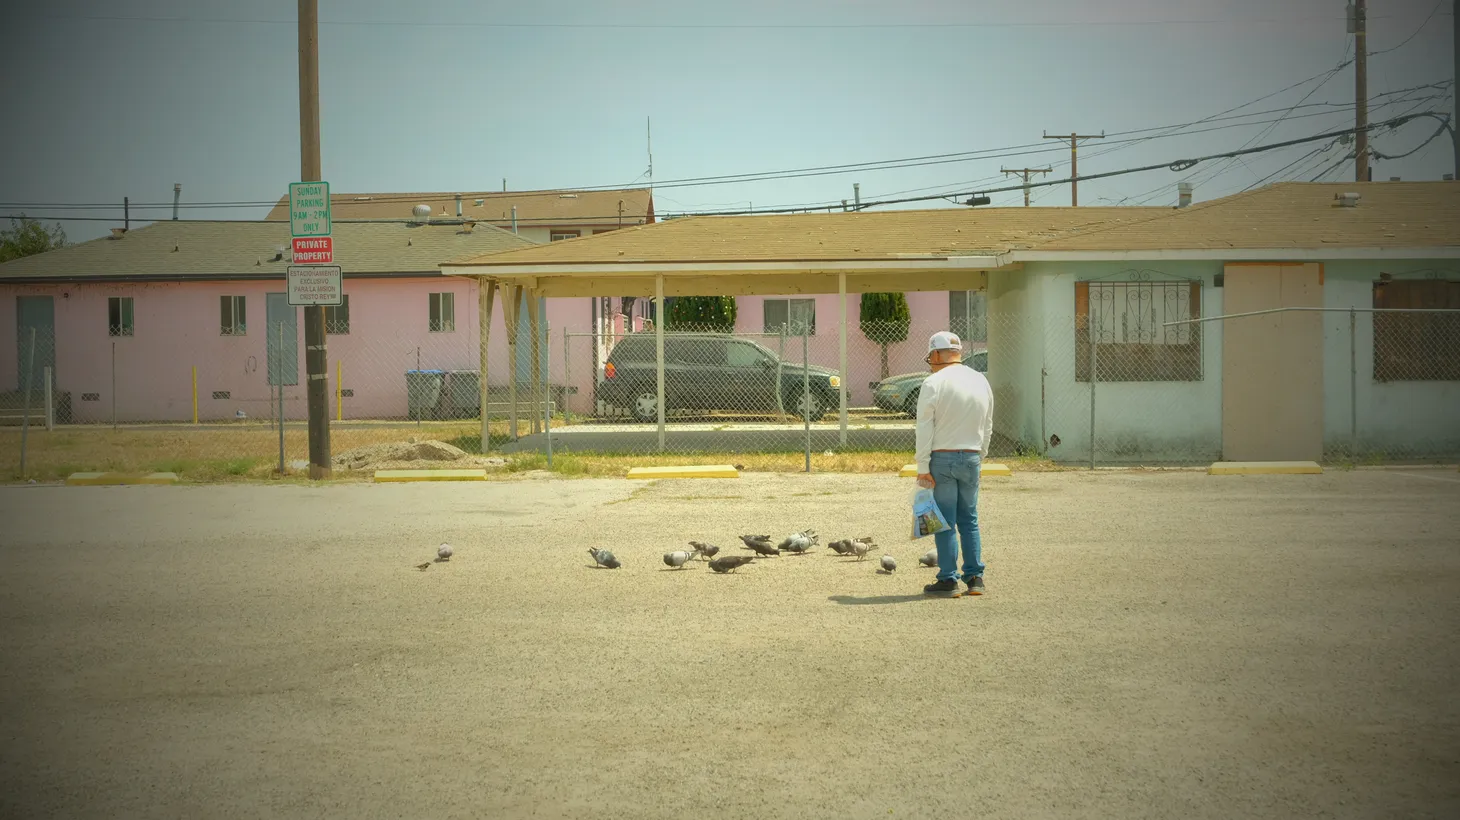 A man feeds pigeons outside of an abandoned building in Oxnard’s La Colonia neighborhood.